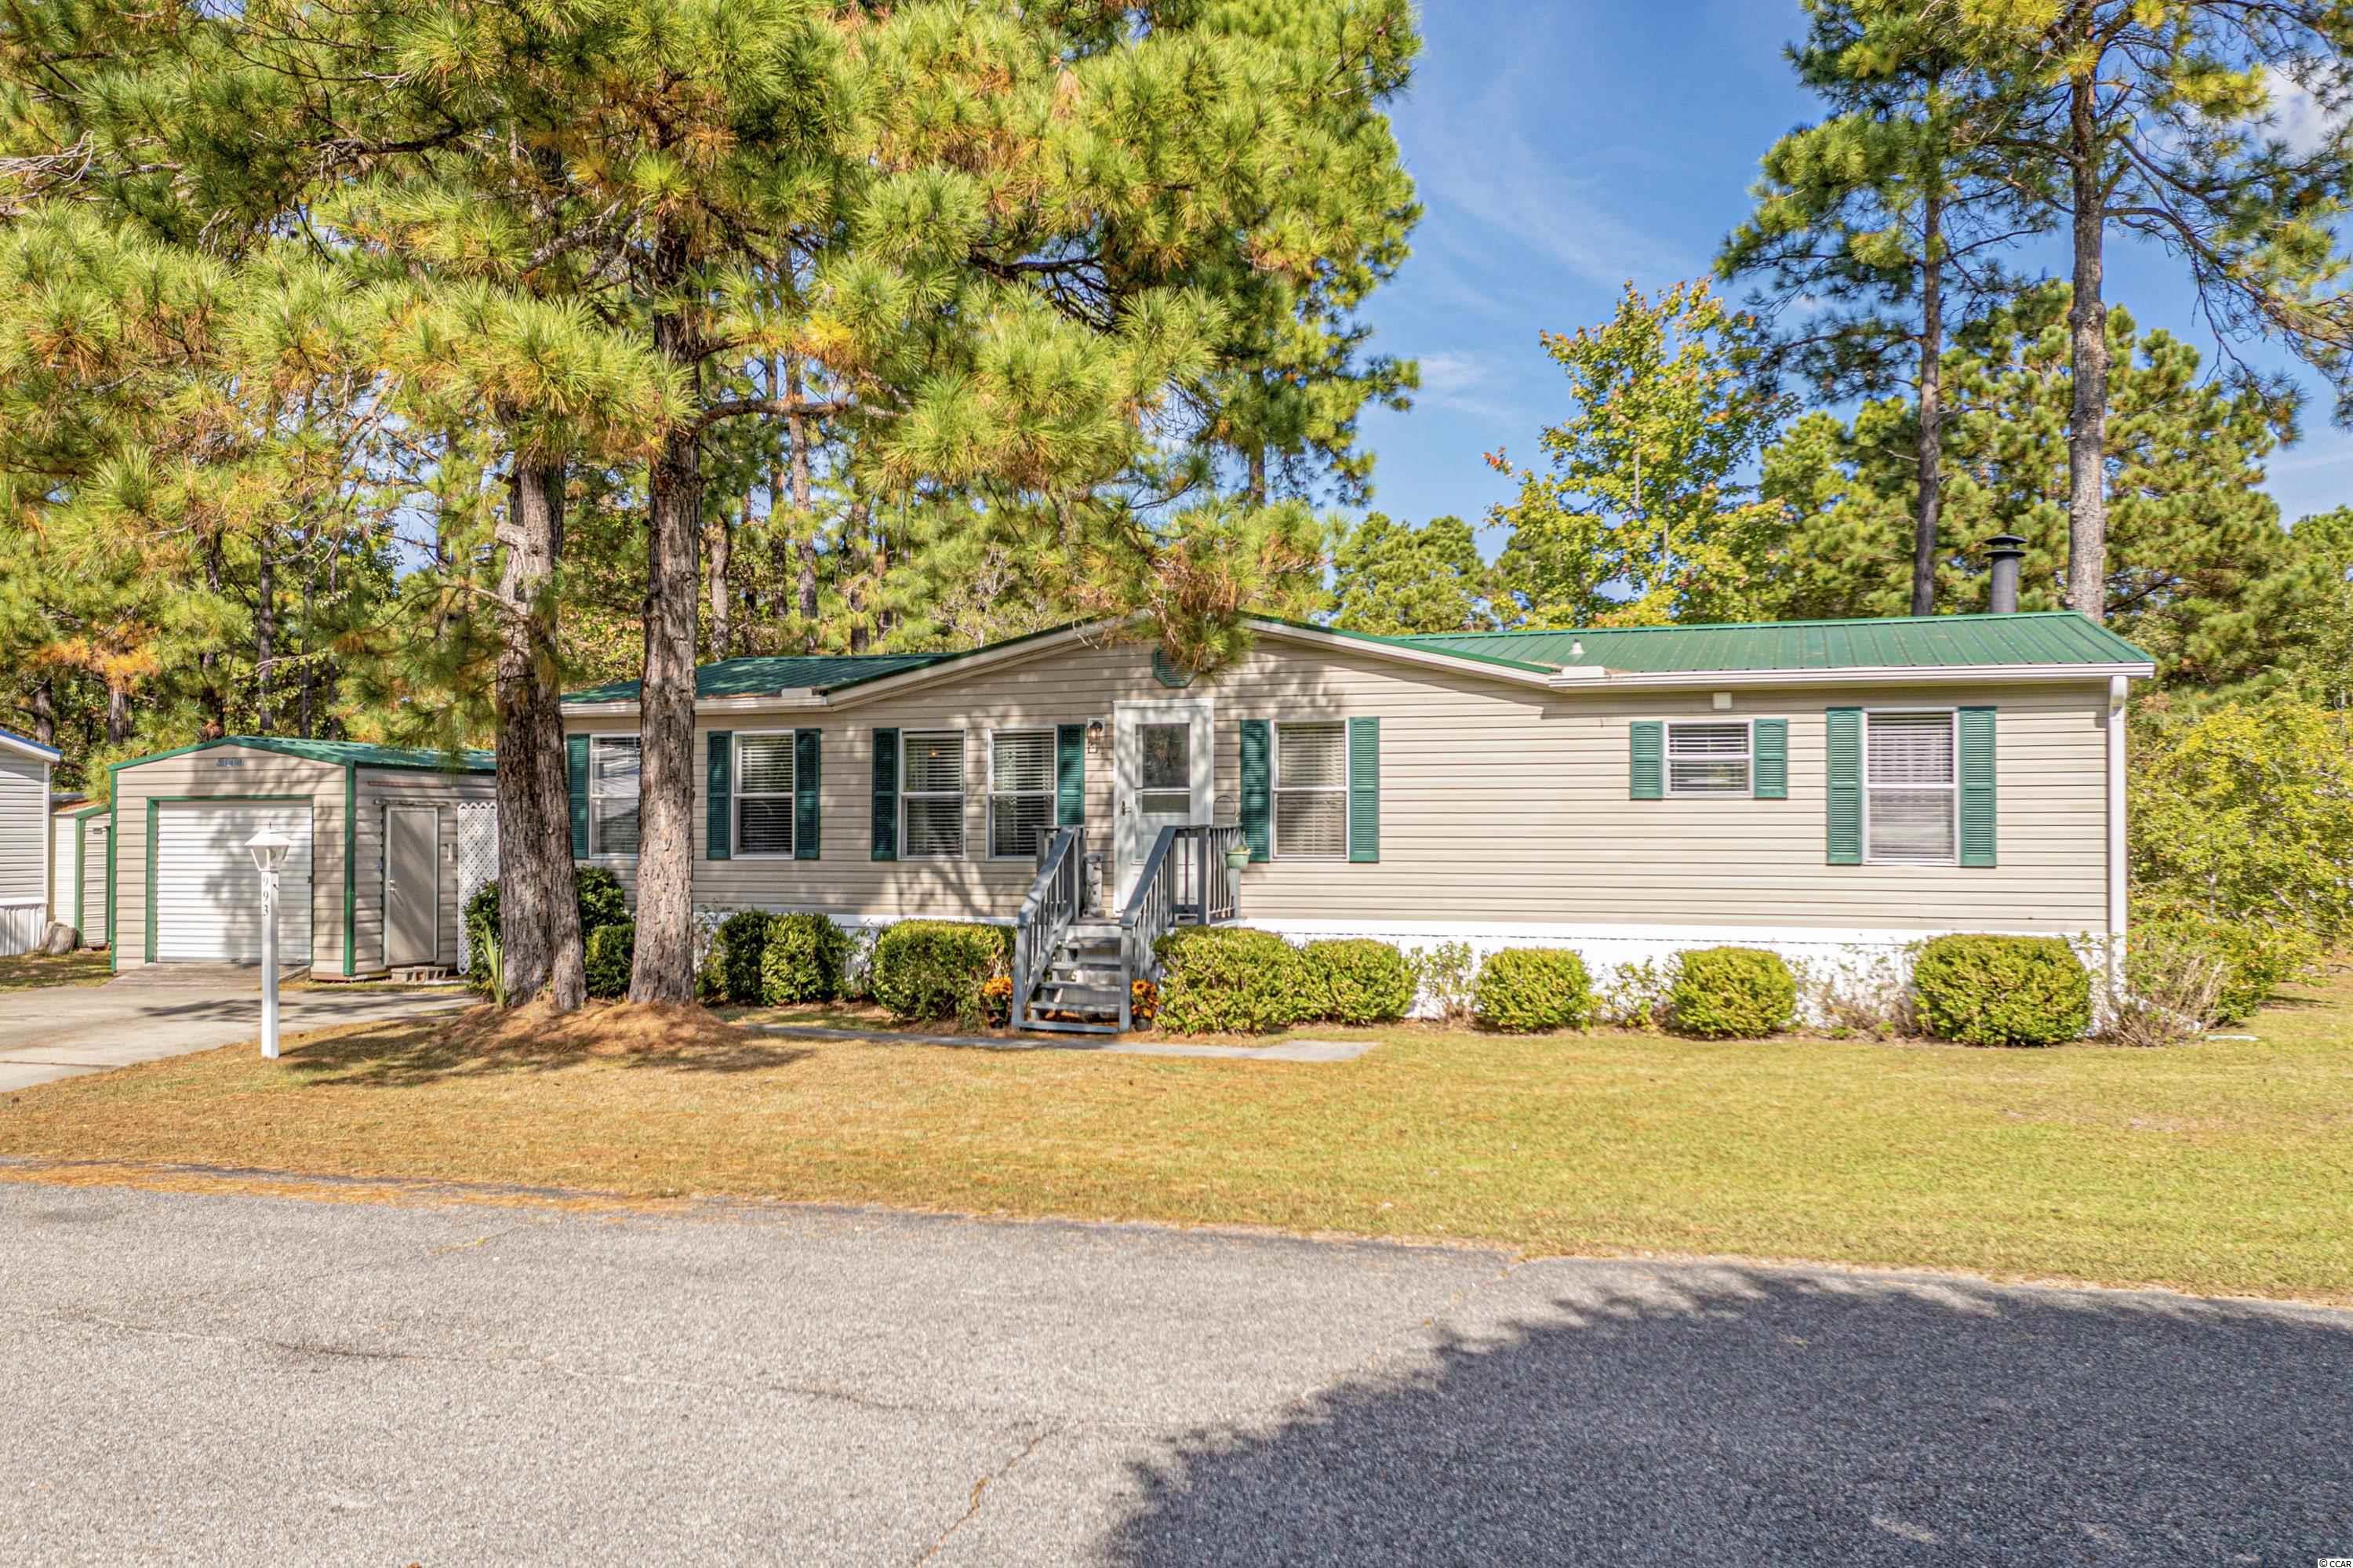 993 Chasewood Ln. Conway, SC 29526